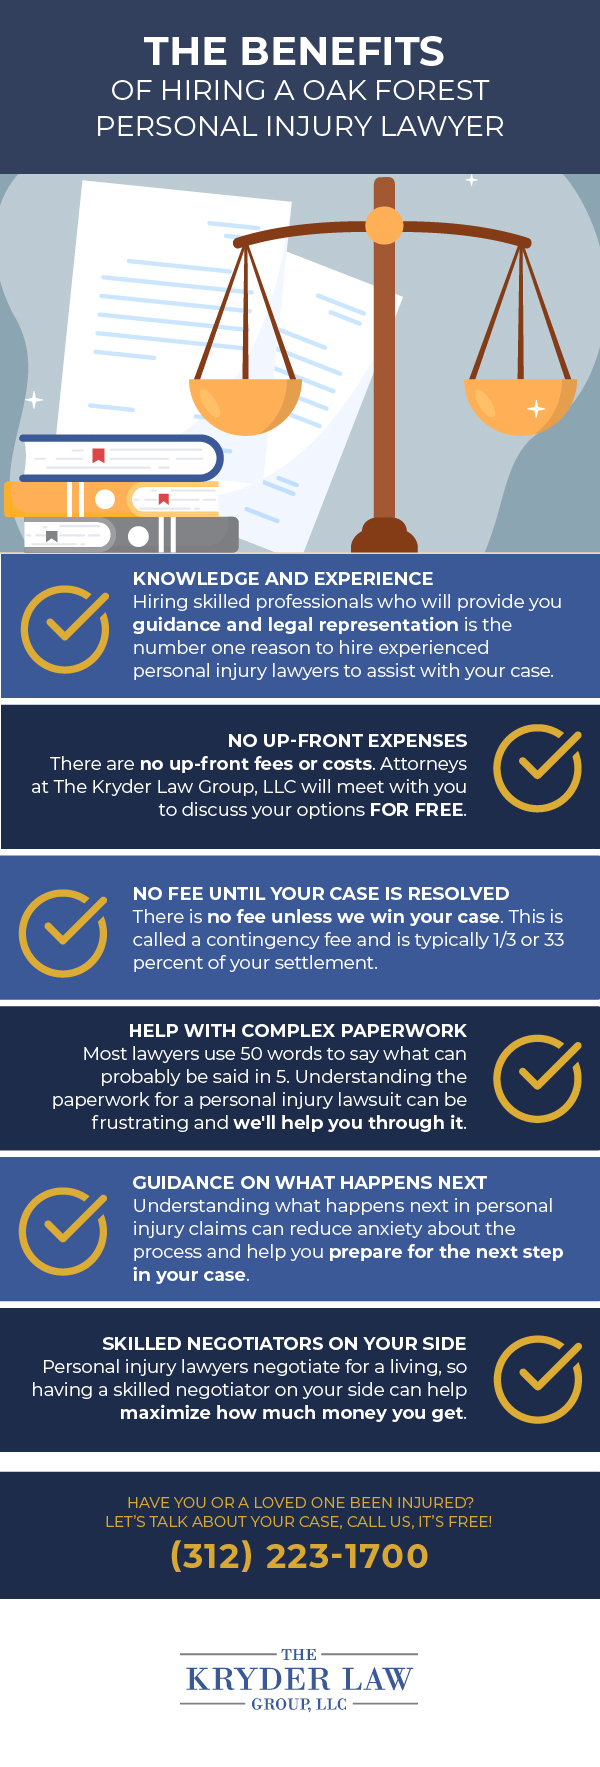 The Benefits of Hiring a Oak Forest Personal Injury Lawyer Infographic